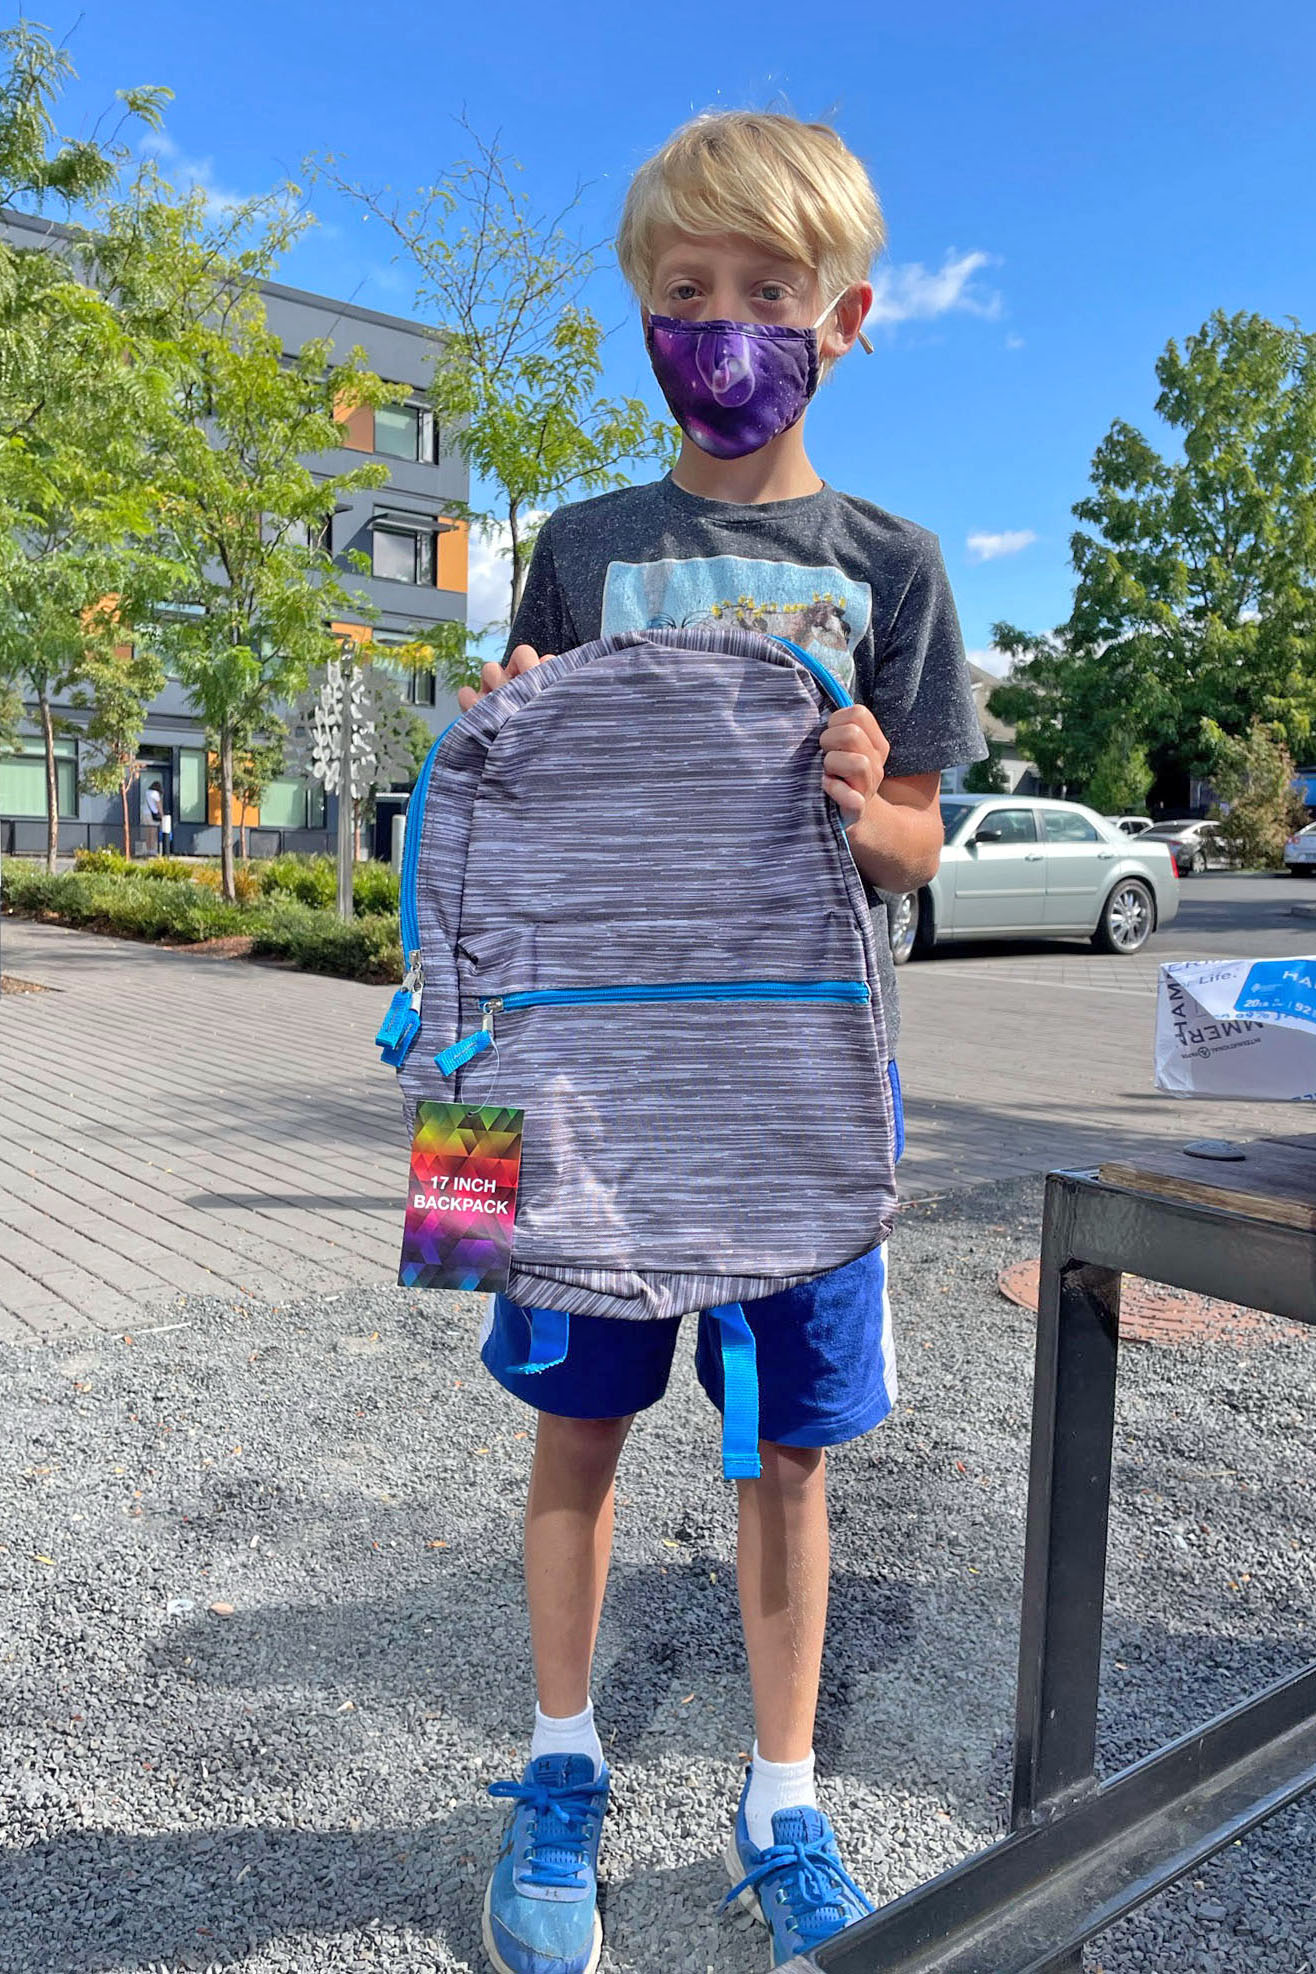 A boy wears a face mask, stands in front of a blue sky, and holds up a gray striped backpack